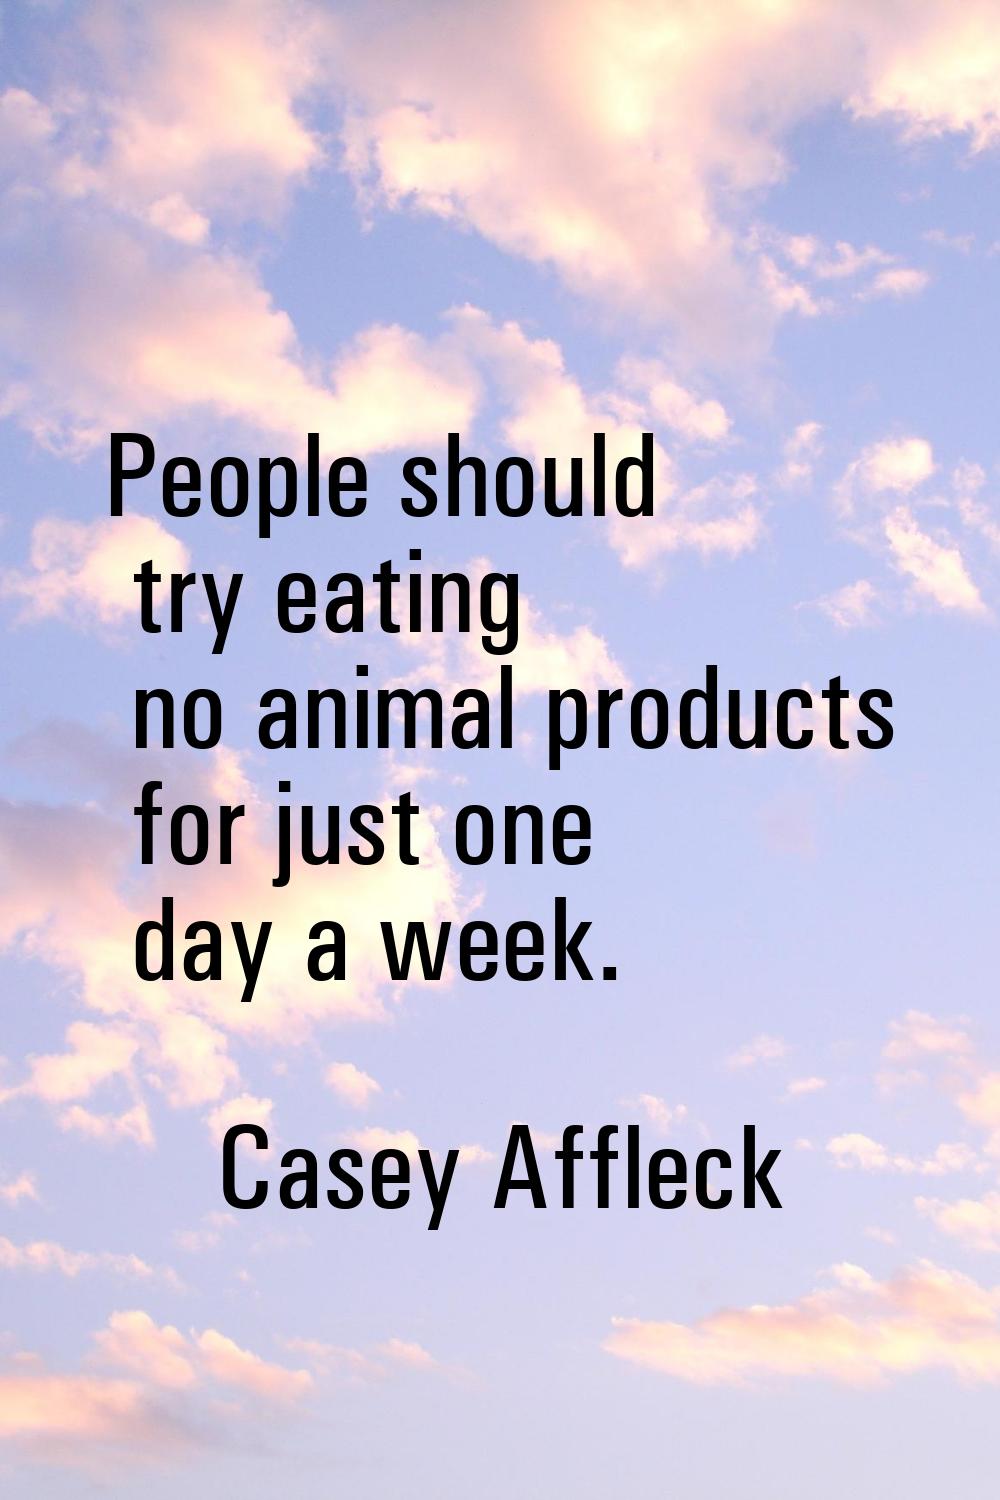 People should try eating no animal products for just one day a week.